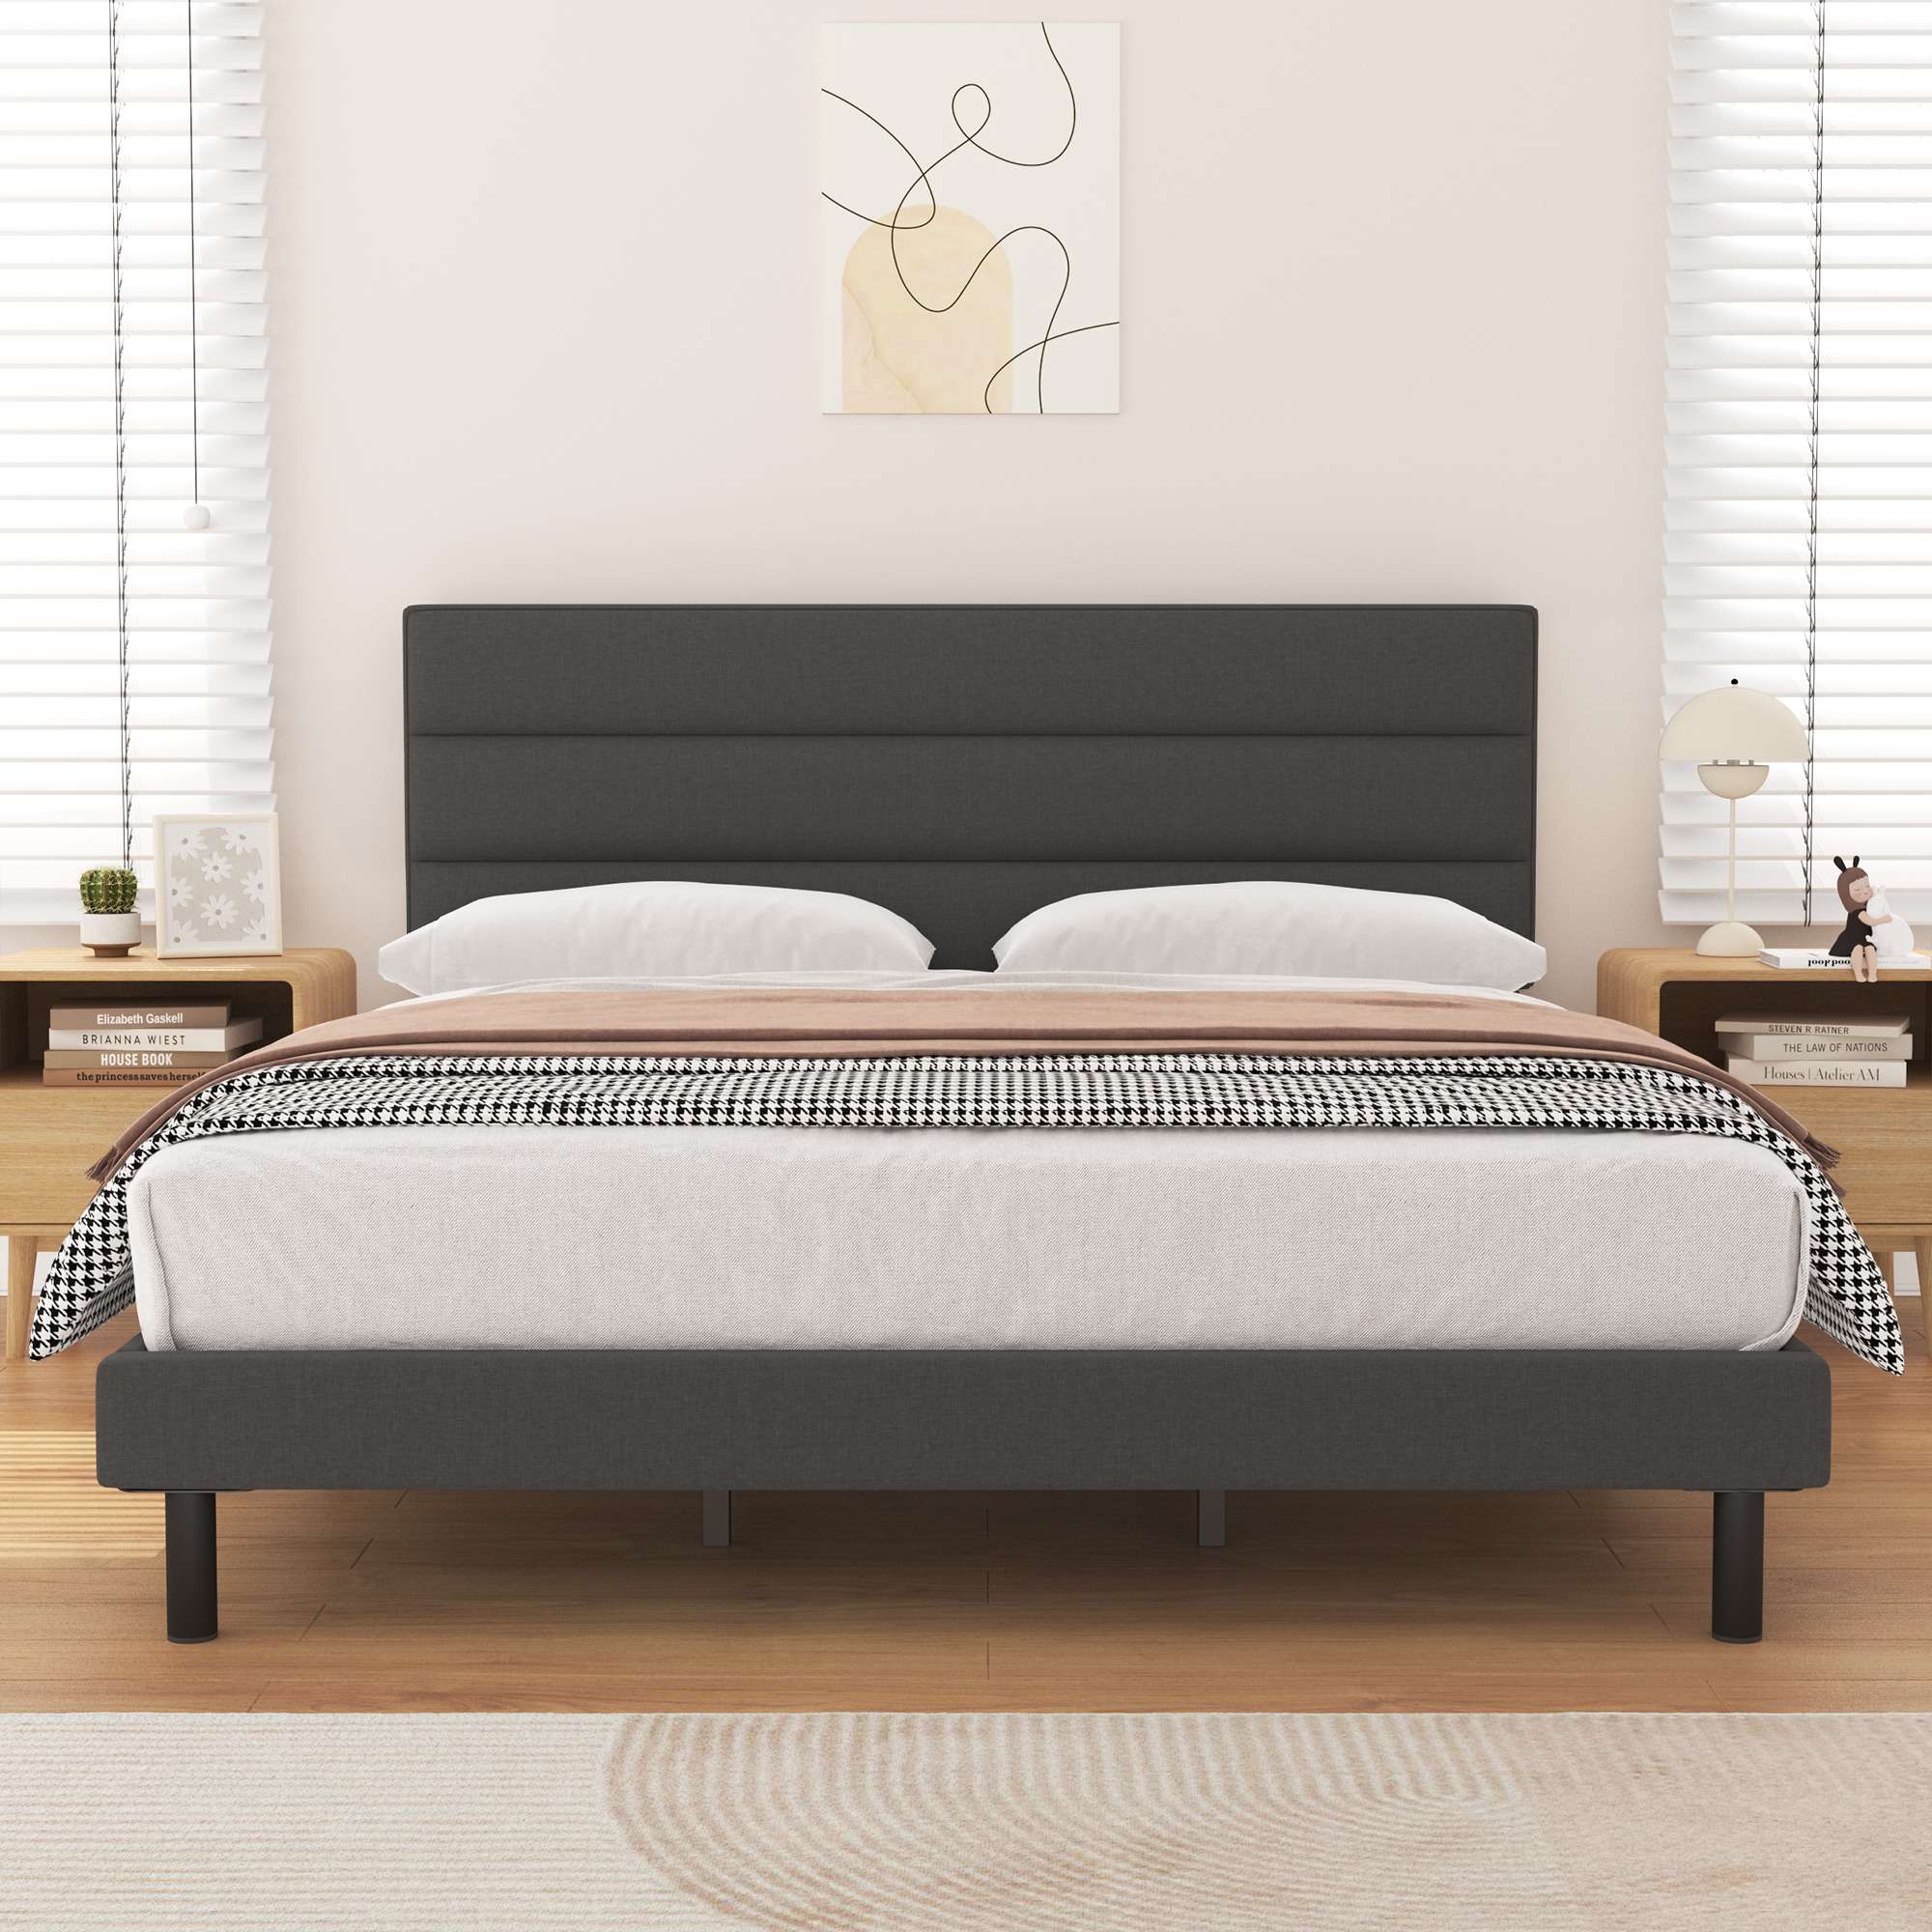 Twin Bed Frame, HAIIDE Twin Size Platform Bed with Wingback Fabric Upholstered Headboard, Dark Gray - image 1 of 8